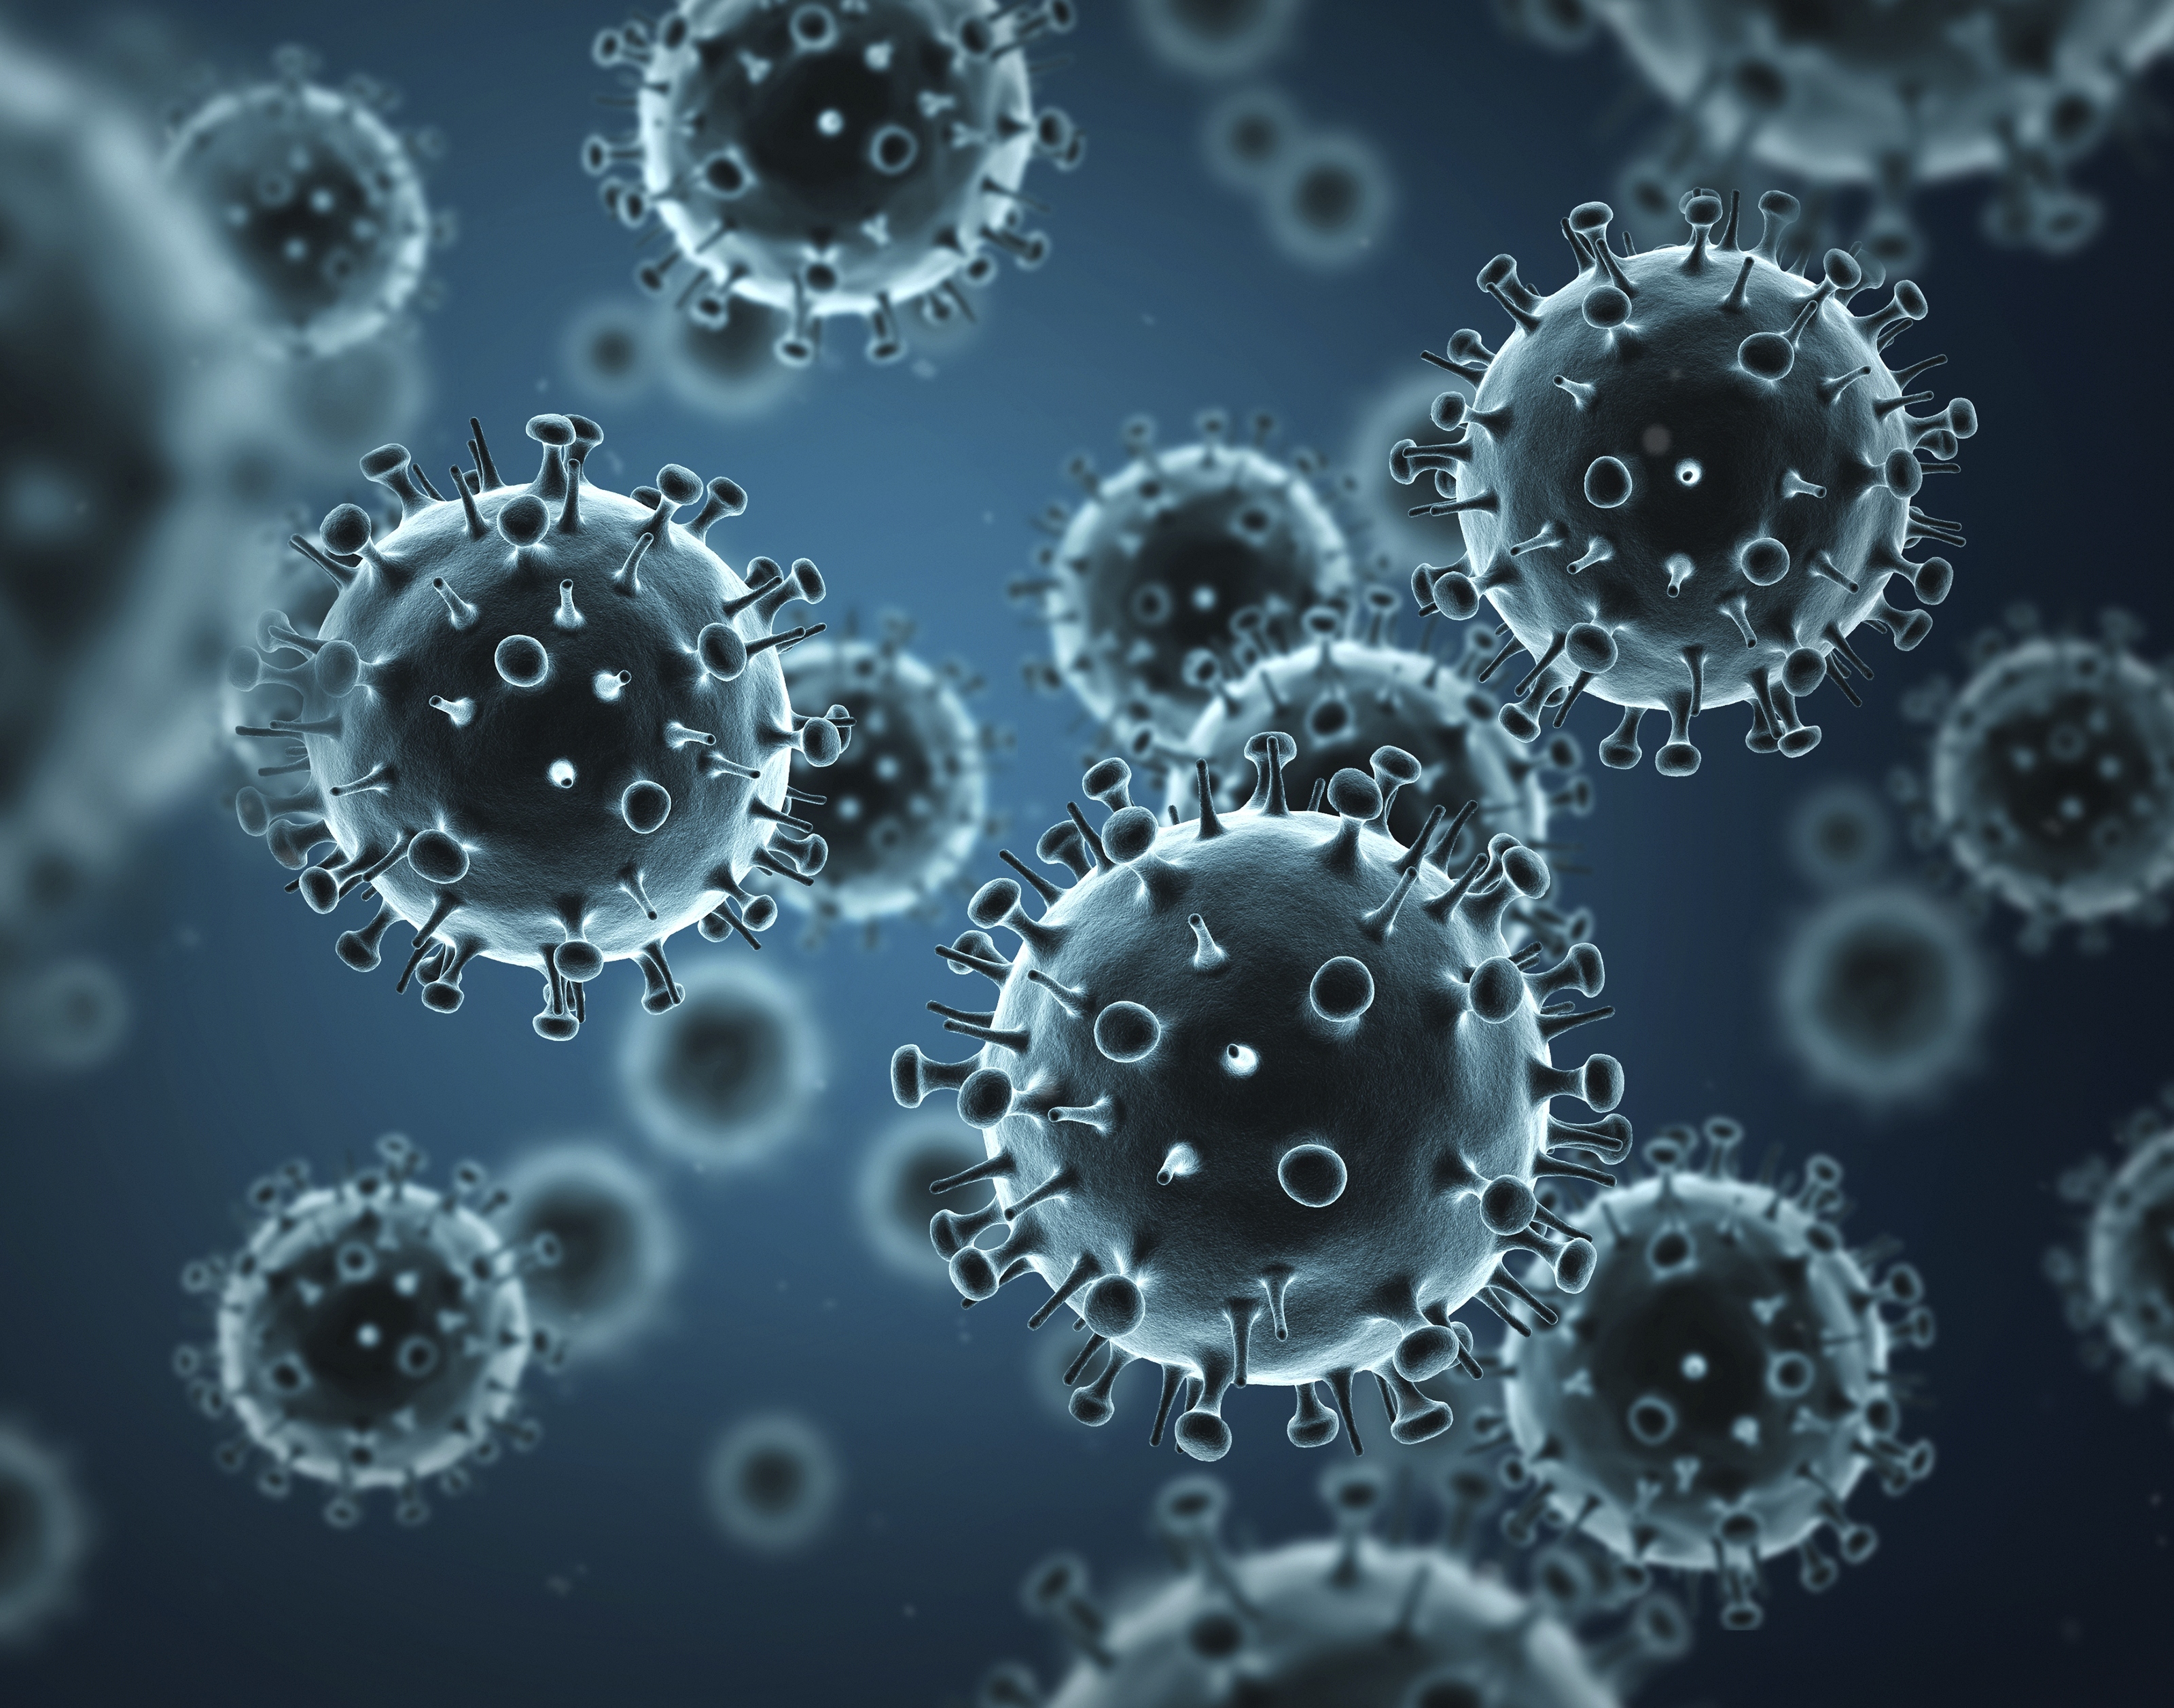 Intestinal Bacteria and Flavonoid Can Increase The Immune System’s Response to Flu